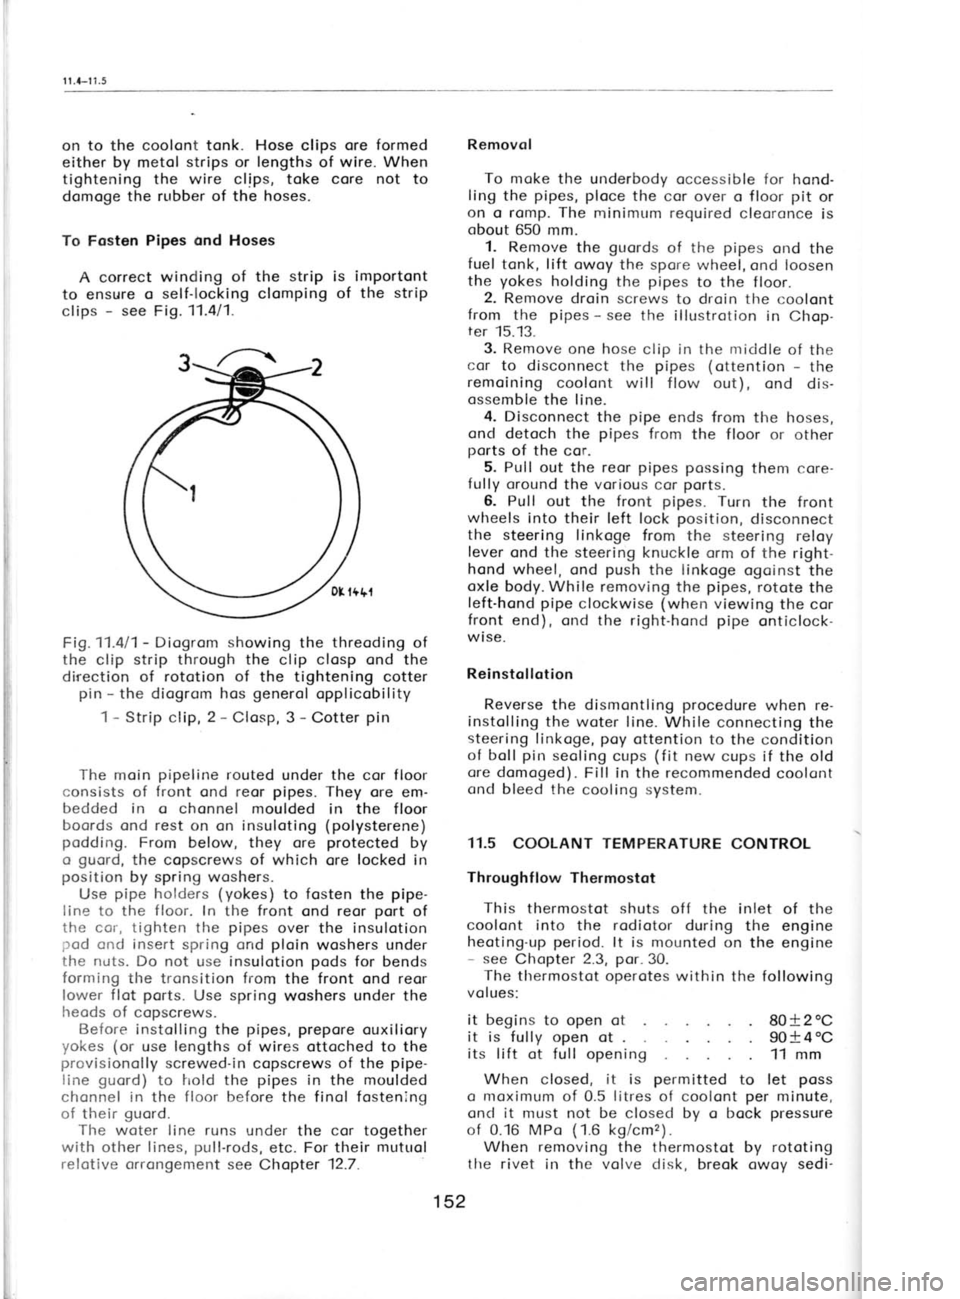 SKODA 120L 1980  Workshop Manual 11.4-11.5
I
I
I
F
r
t
on to the coolont tonk. 
Hose 
clips ore formed
either  by metol  strips 
or lengths 
of wire. When
tightening the  wire  clips, toke  core not  to
domoge the  rubber of the hos